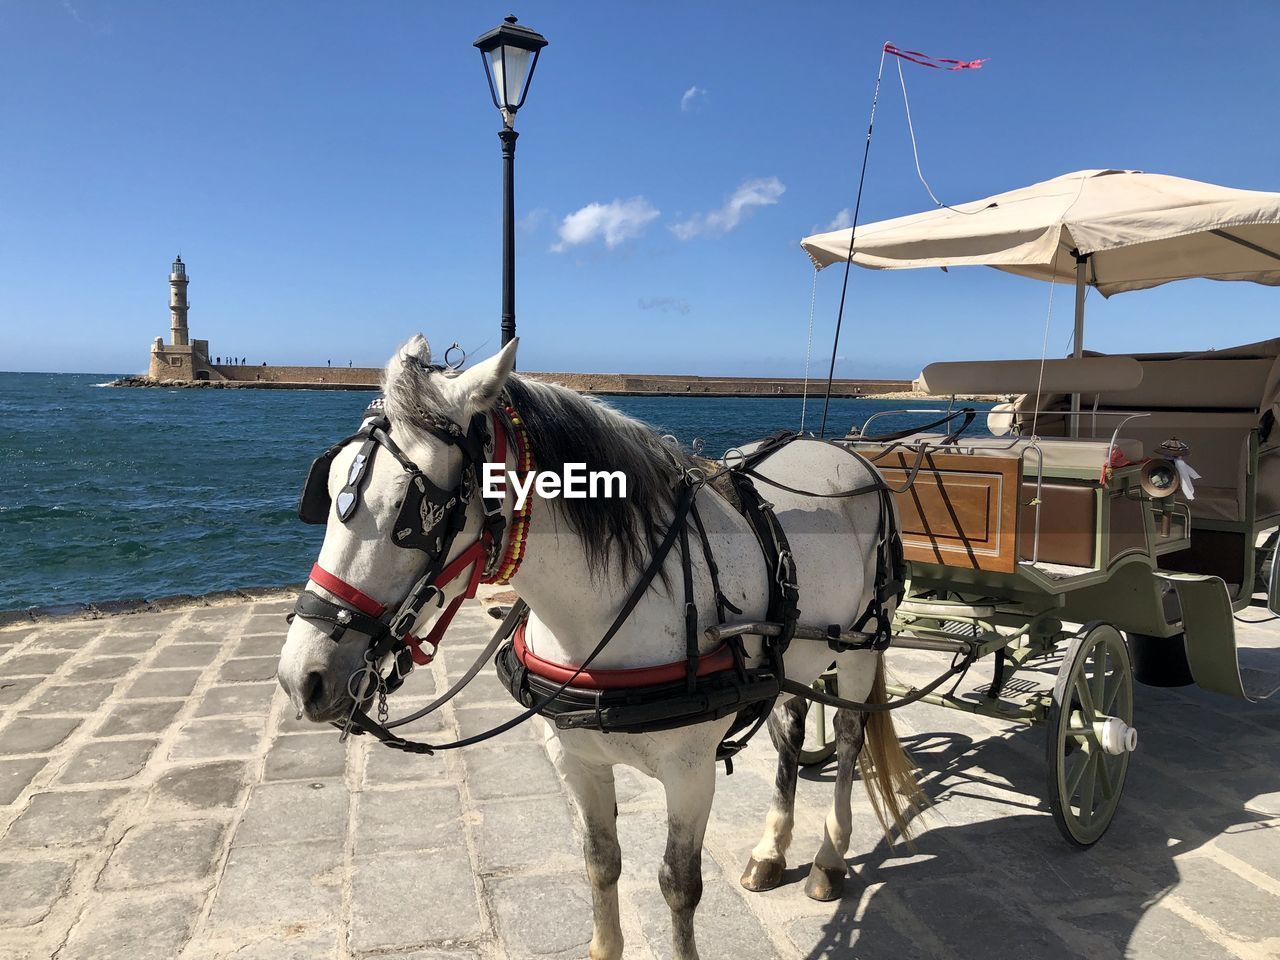 HORSE CART ON STREET BY THE SEA